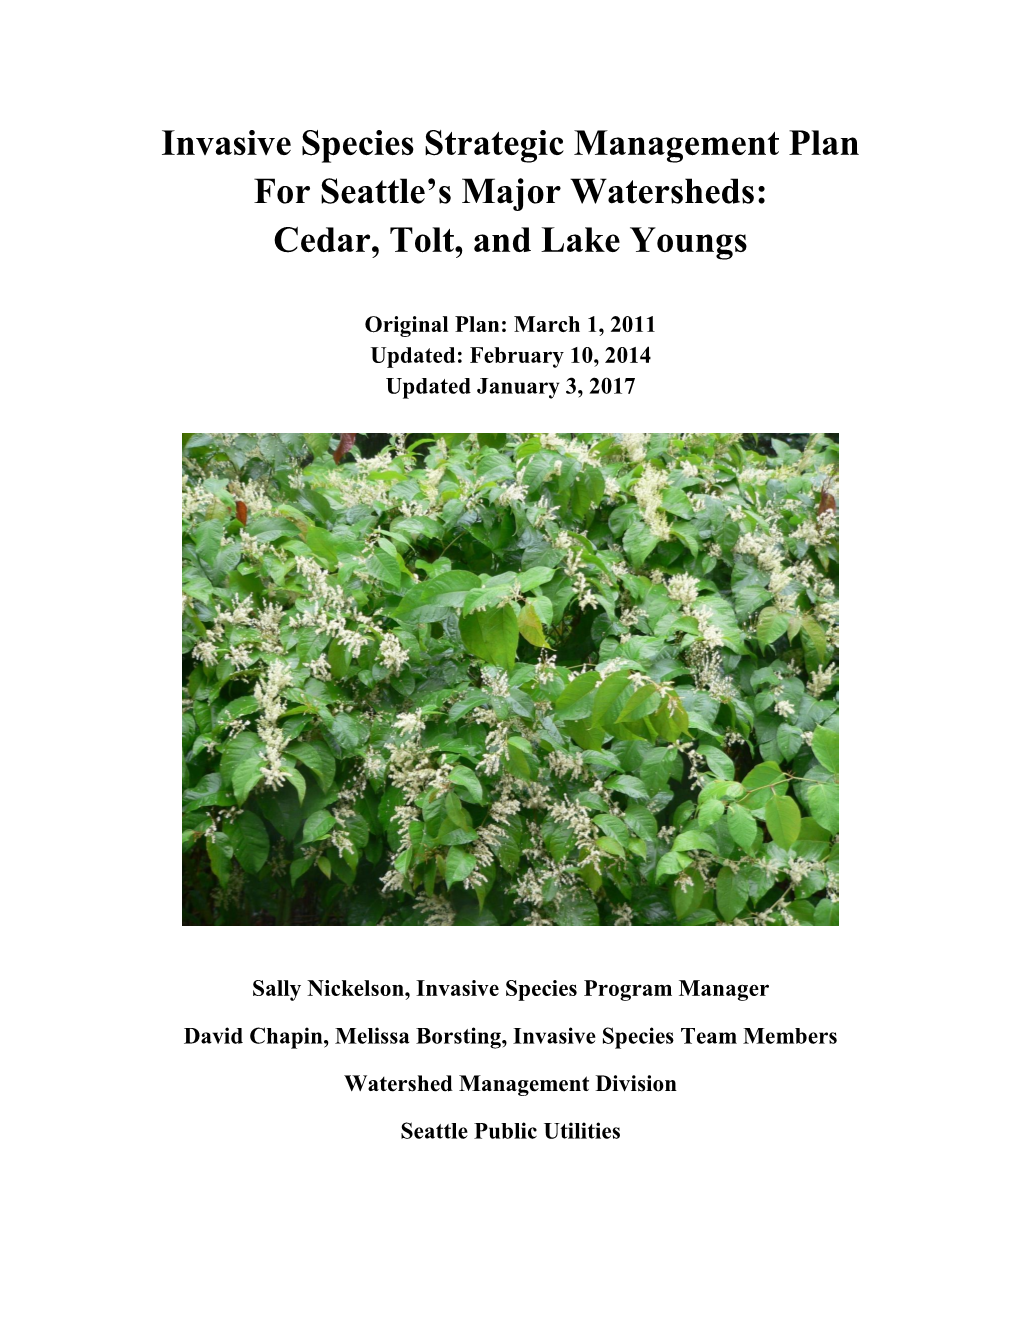 Invasive Species Strategic Management Plan for Seattle’S Major Watersheds: Cedar, Tolt, and Lake Youngs